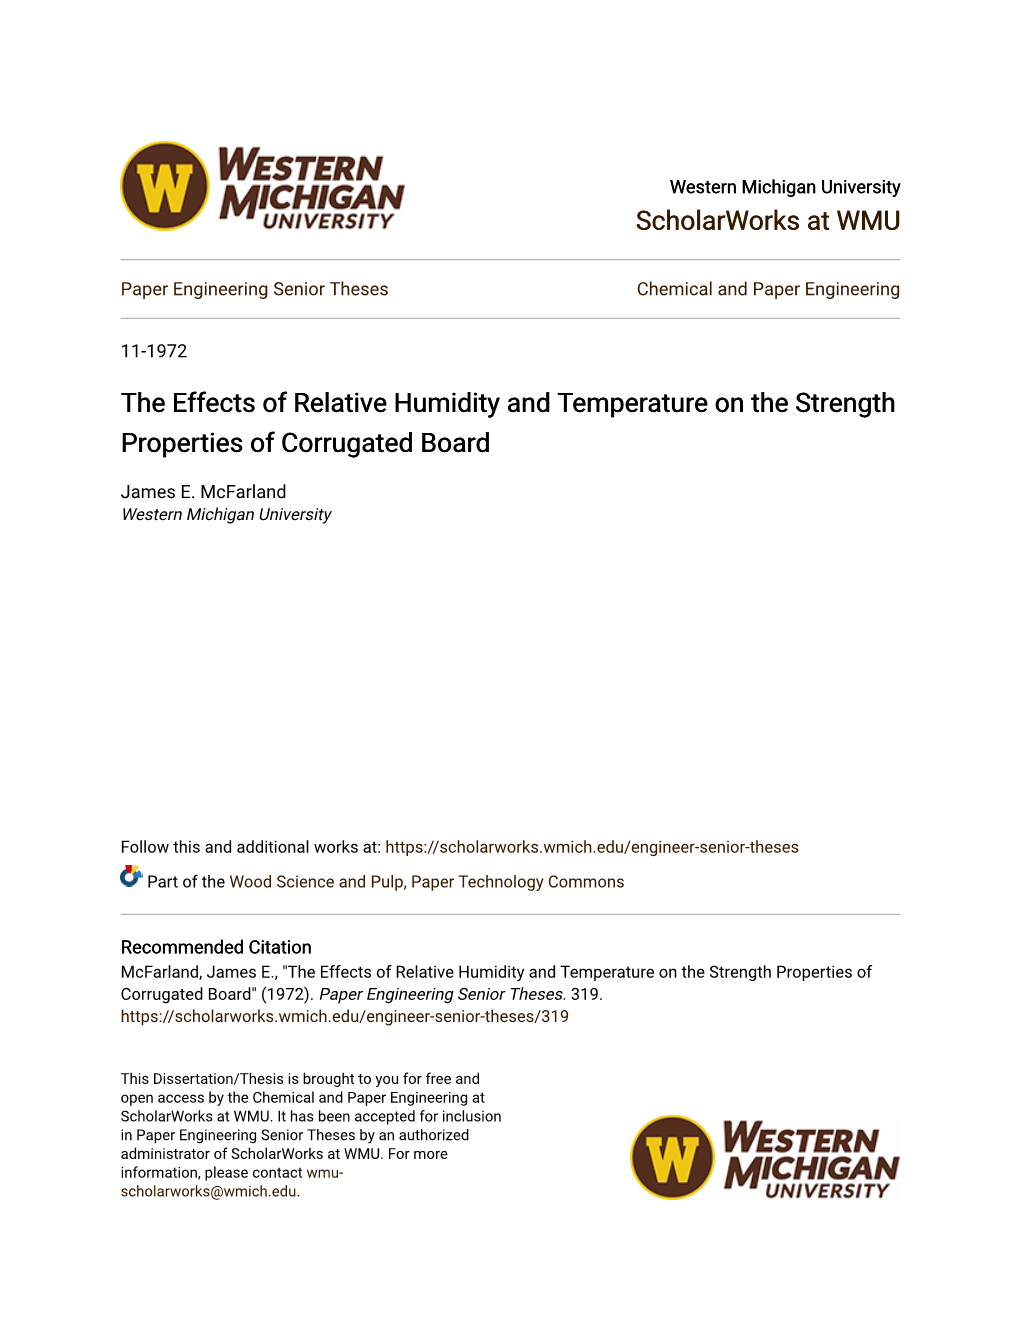 The Effects of Relative Humidity and Temperature on the Strength Properties of Corrugated Board